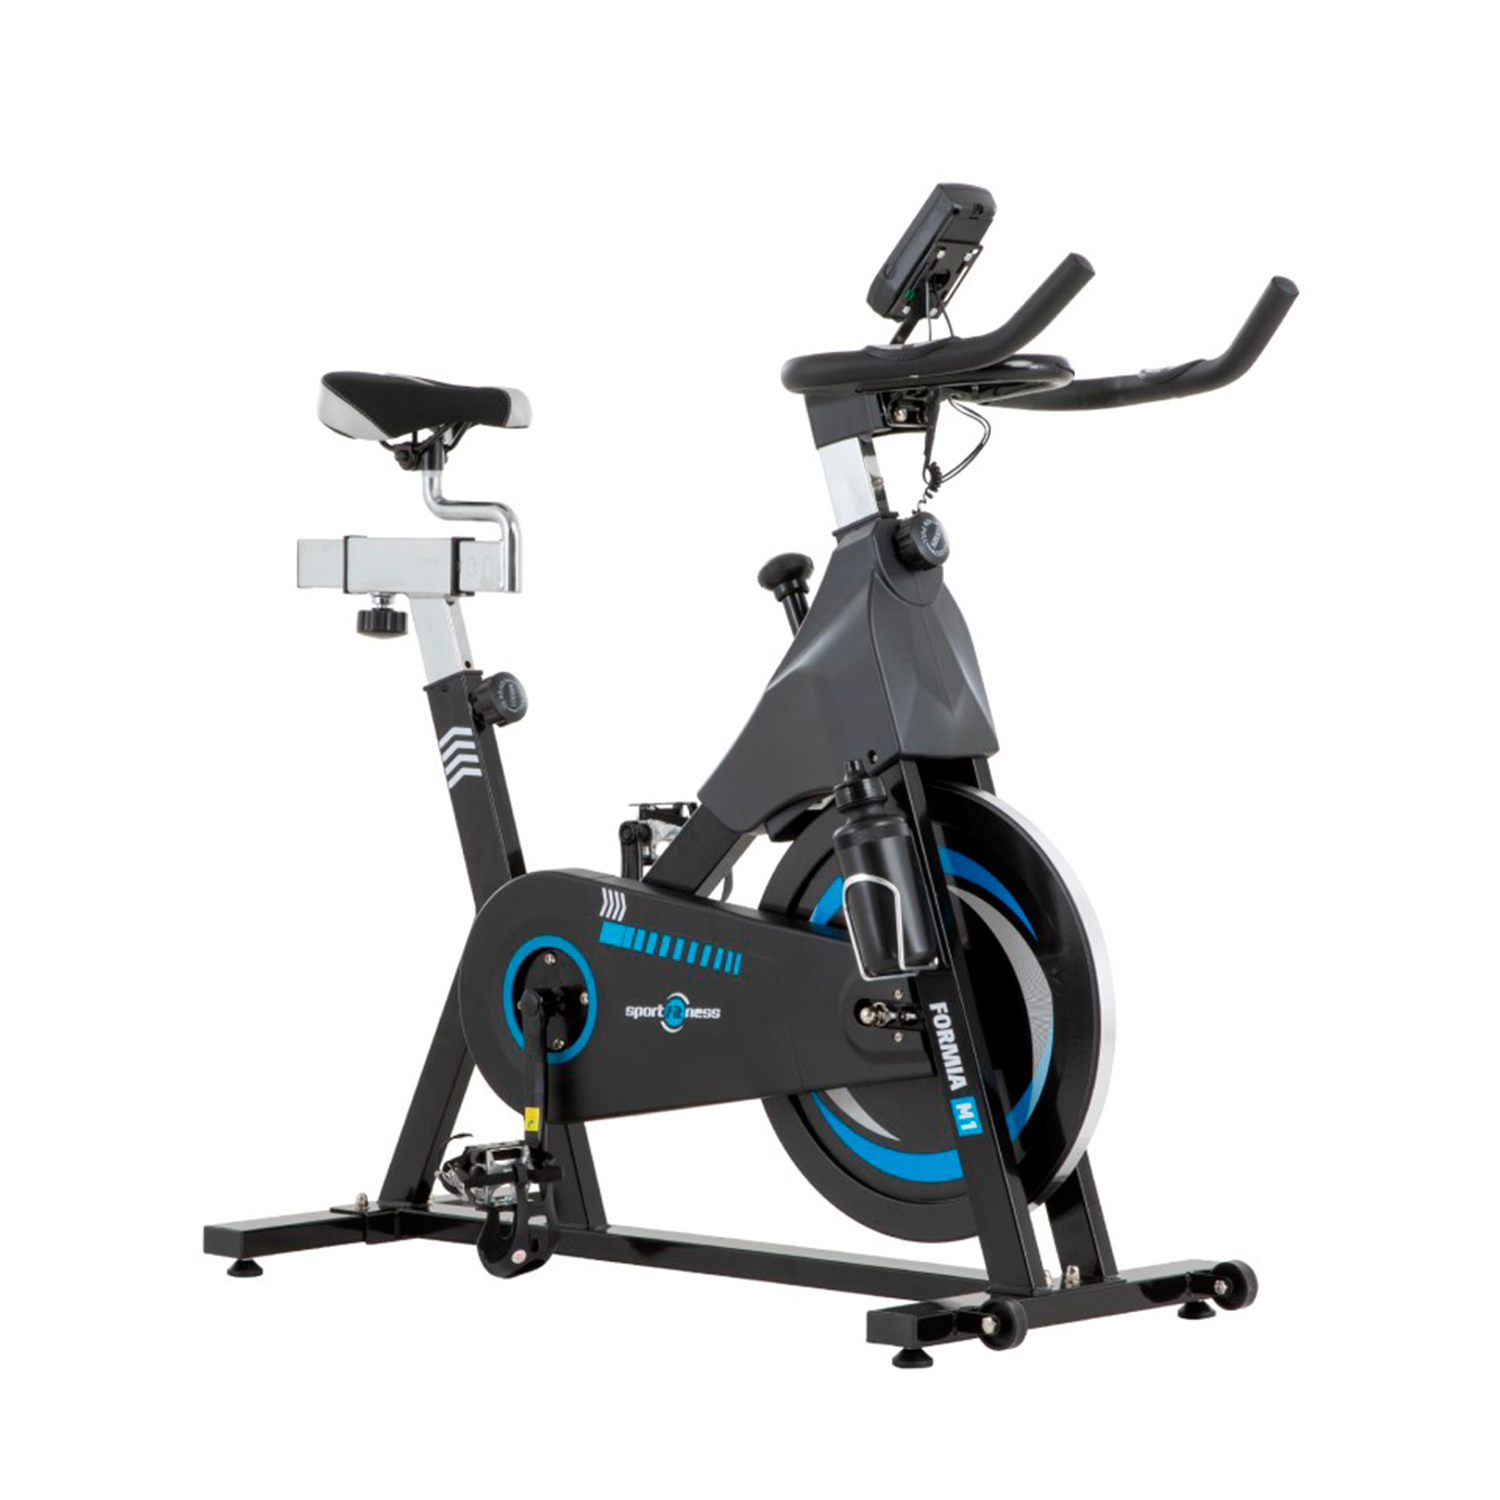 Bicicleta Spinning Profesional Magnetica